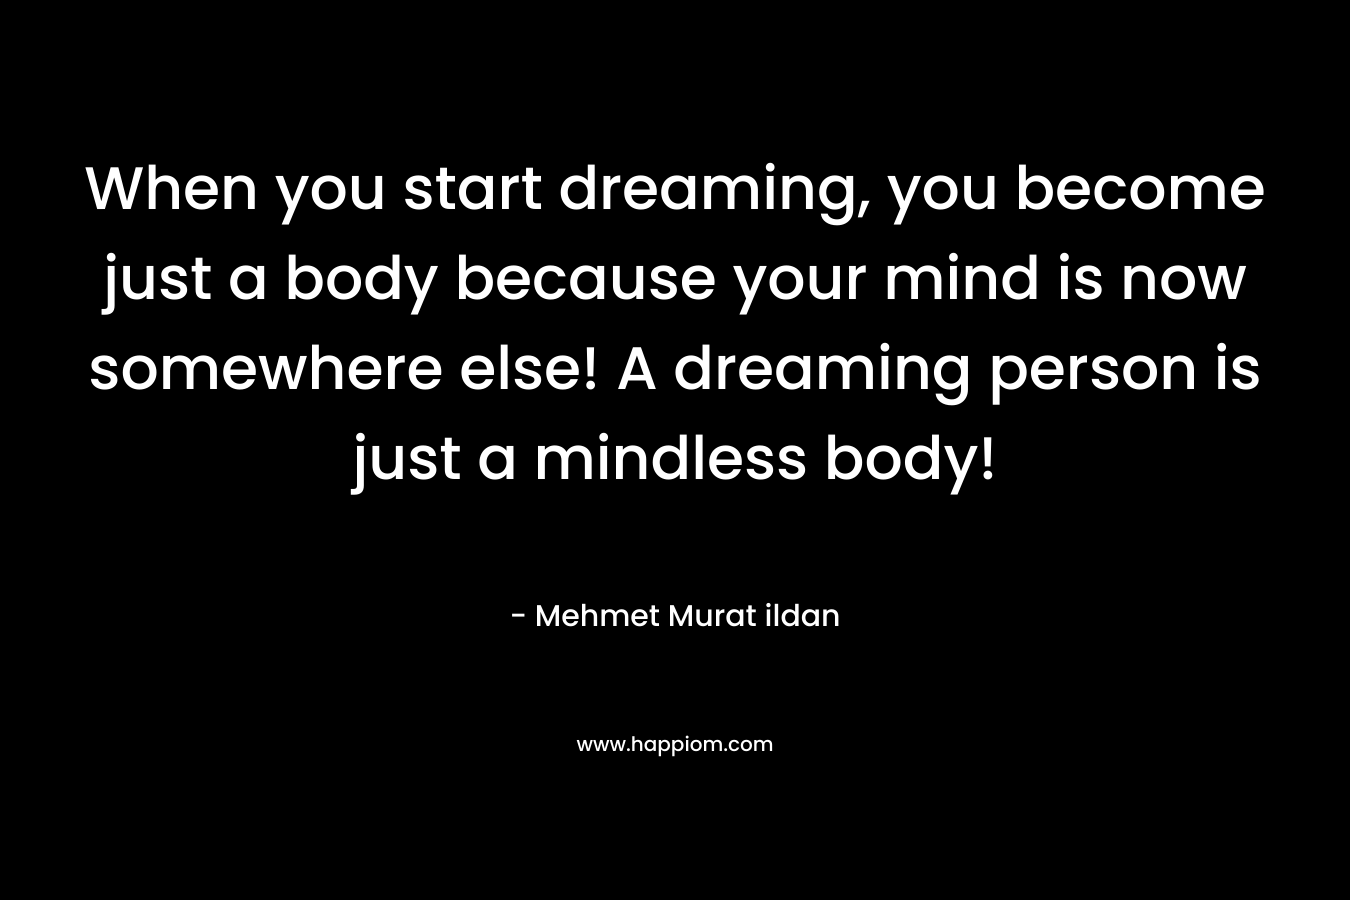 When you start dreaming, you become just a body because your mind is now somewhere else! A dreaming person is just a mindless body!